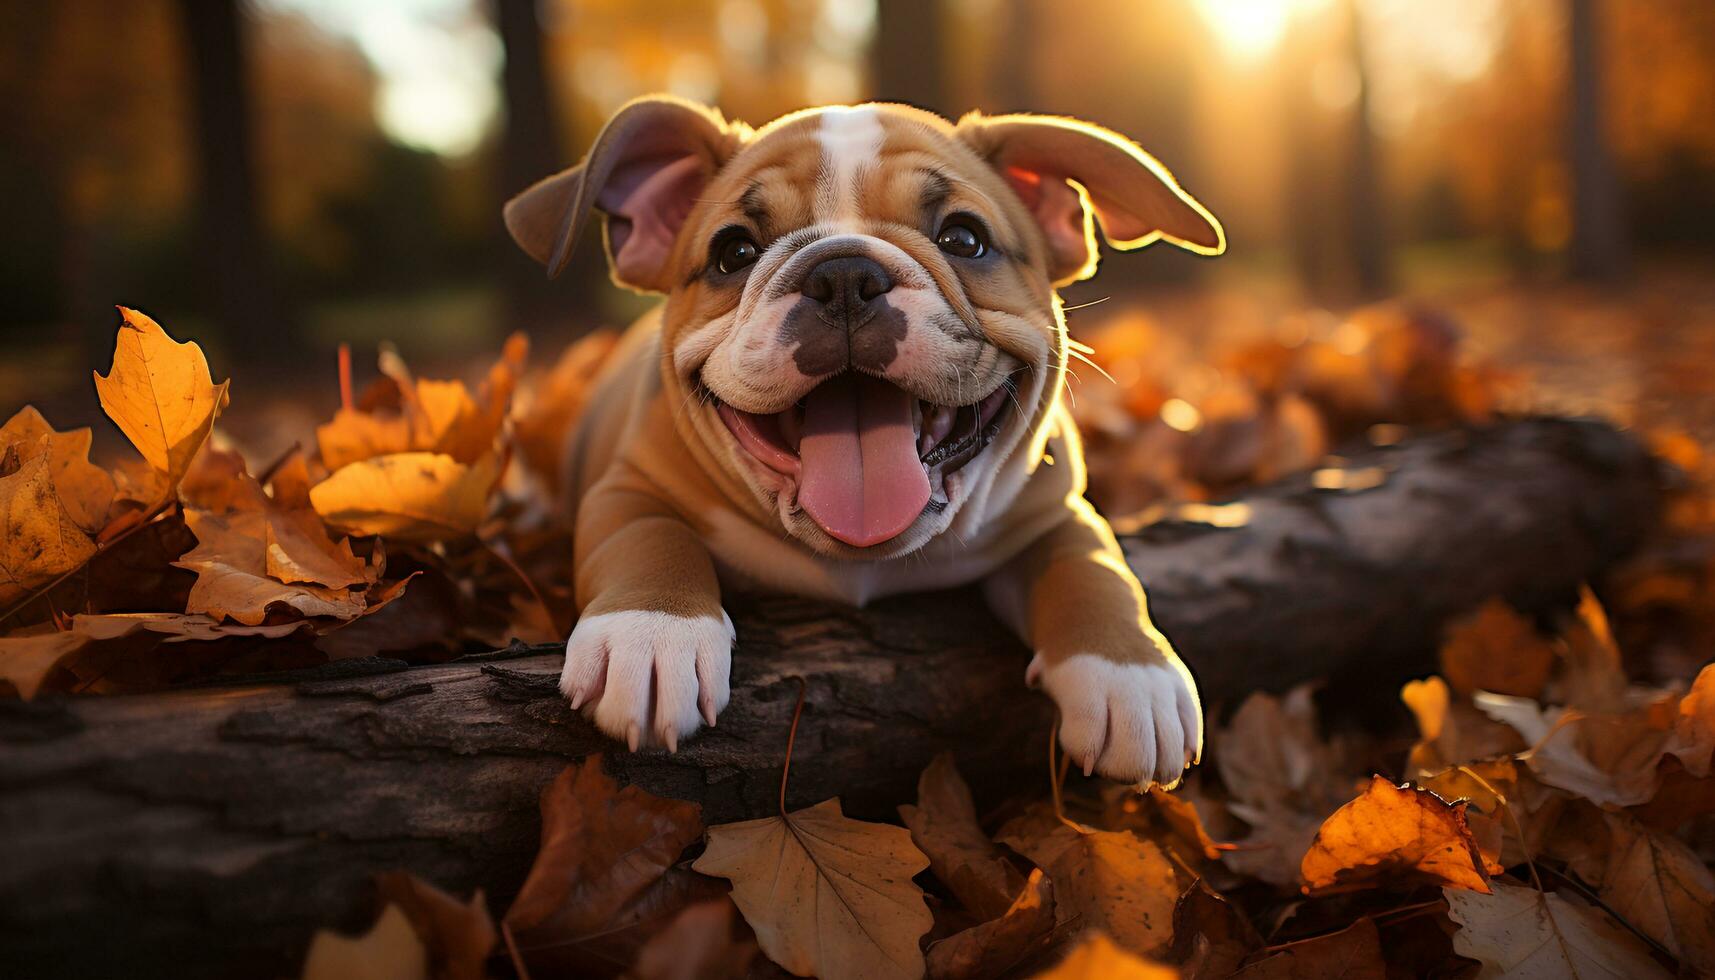 Cute bulldog puppy playing in autumn forest, pure joy and happiness generated by AI photo